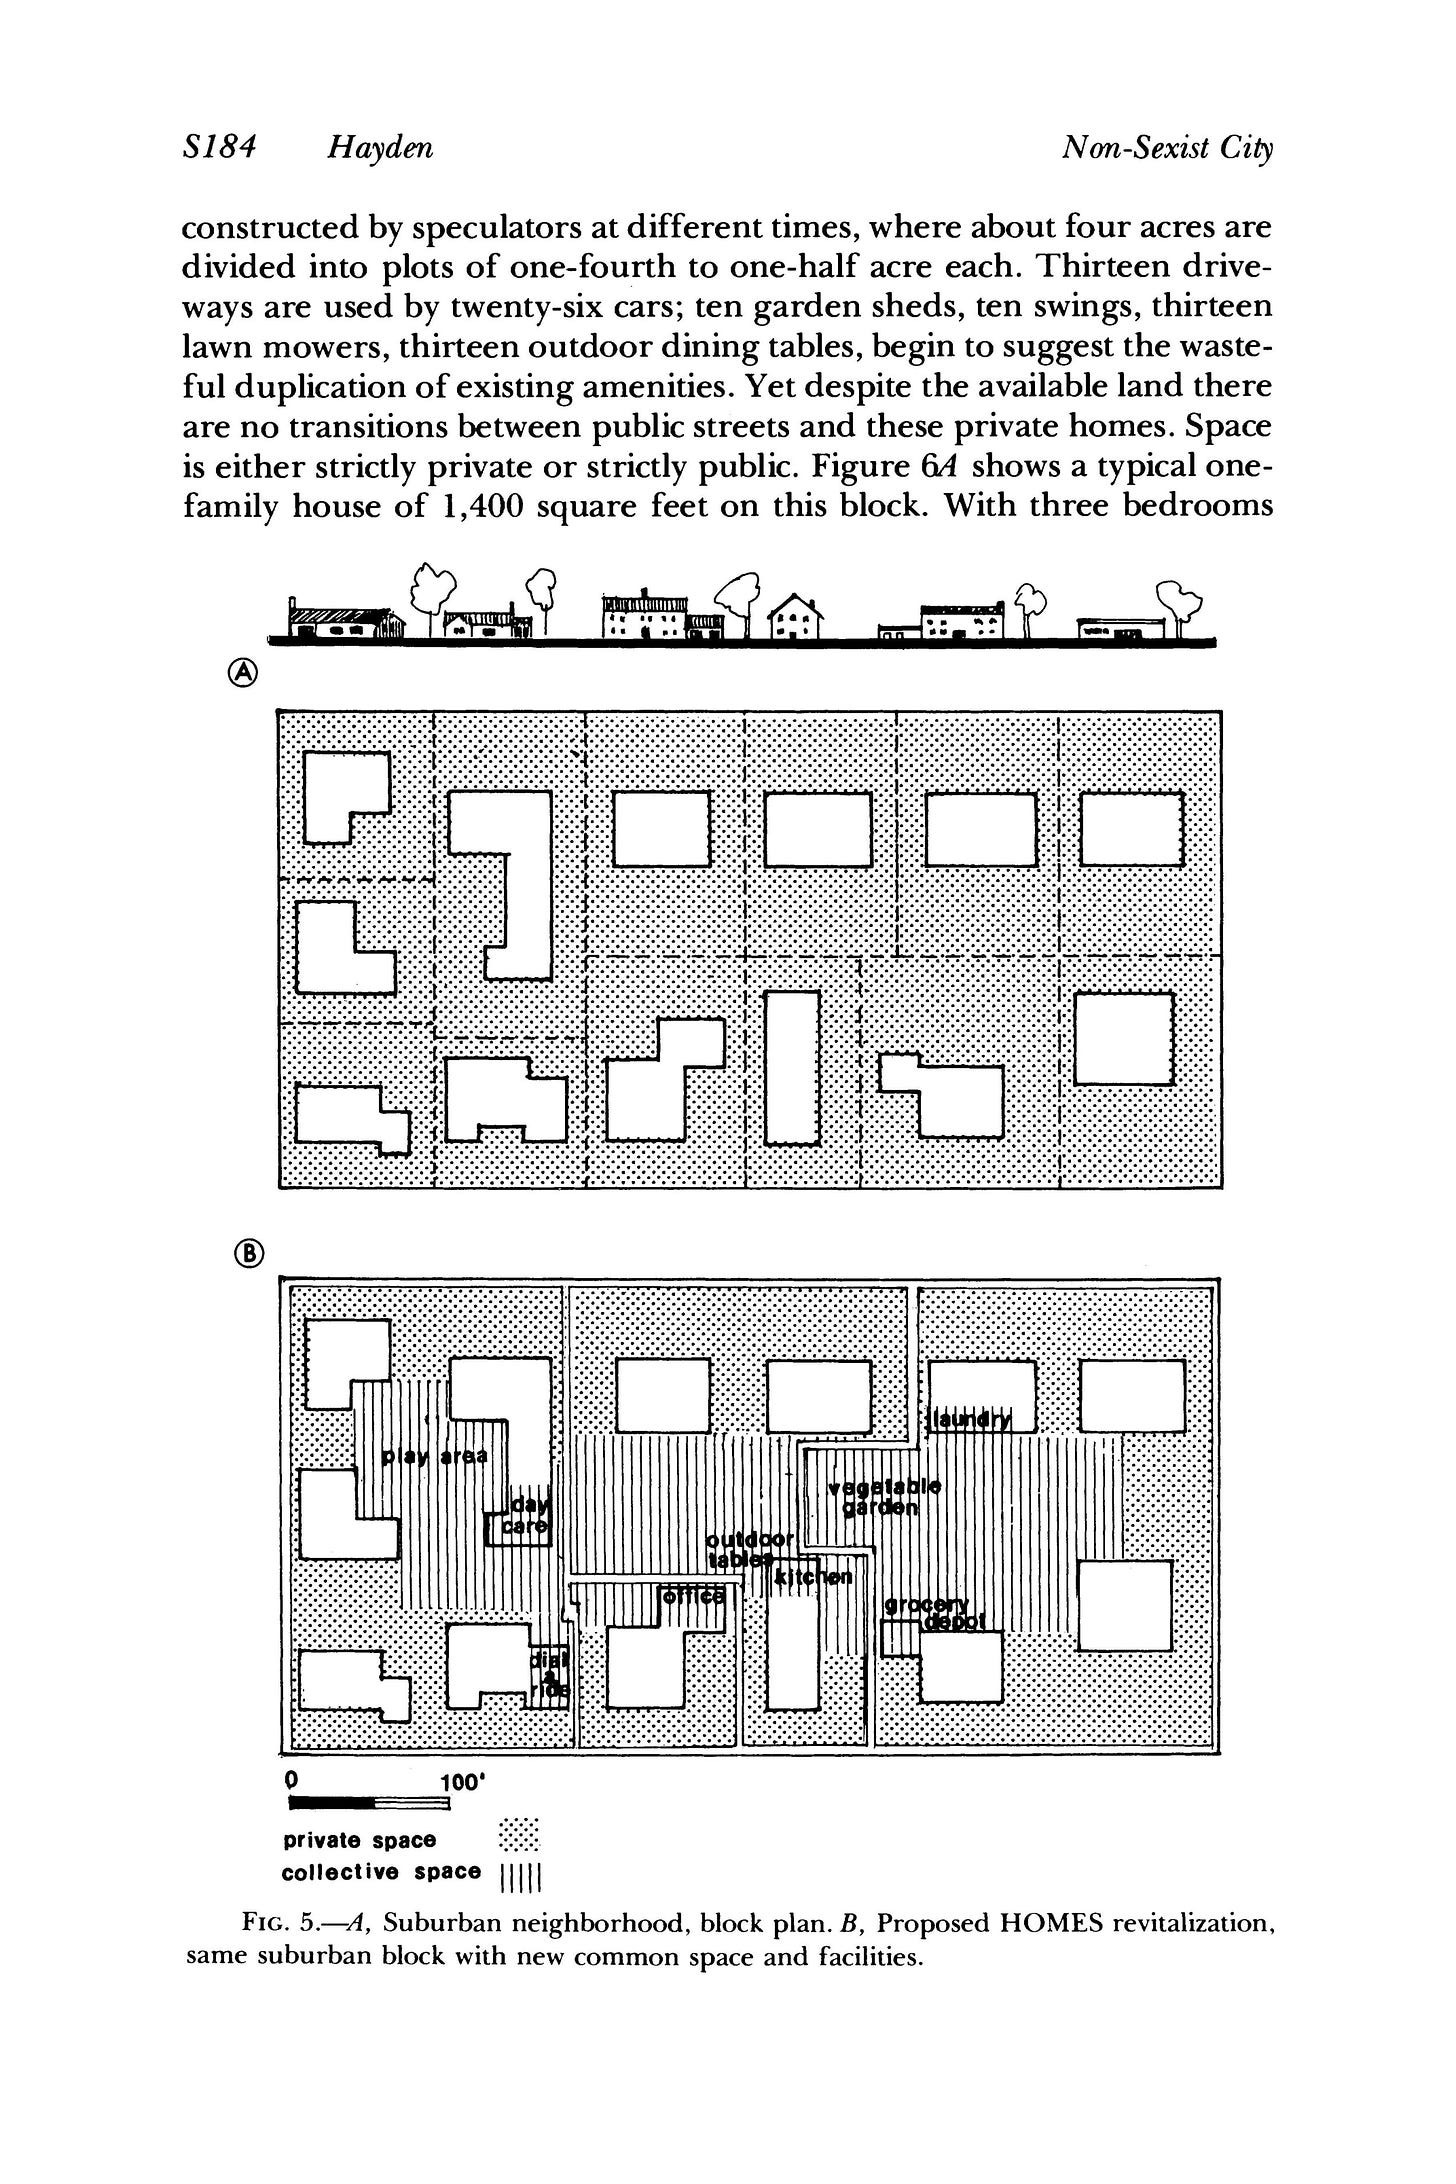 Images of Dolores Hayden's Non-Sexist City, reprinted in Gender, Space and Architecture: An Interdisciplinary Introduction (Routledge, 1999).